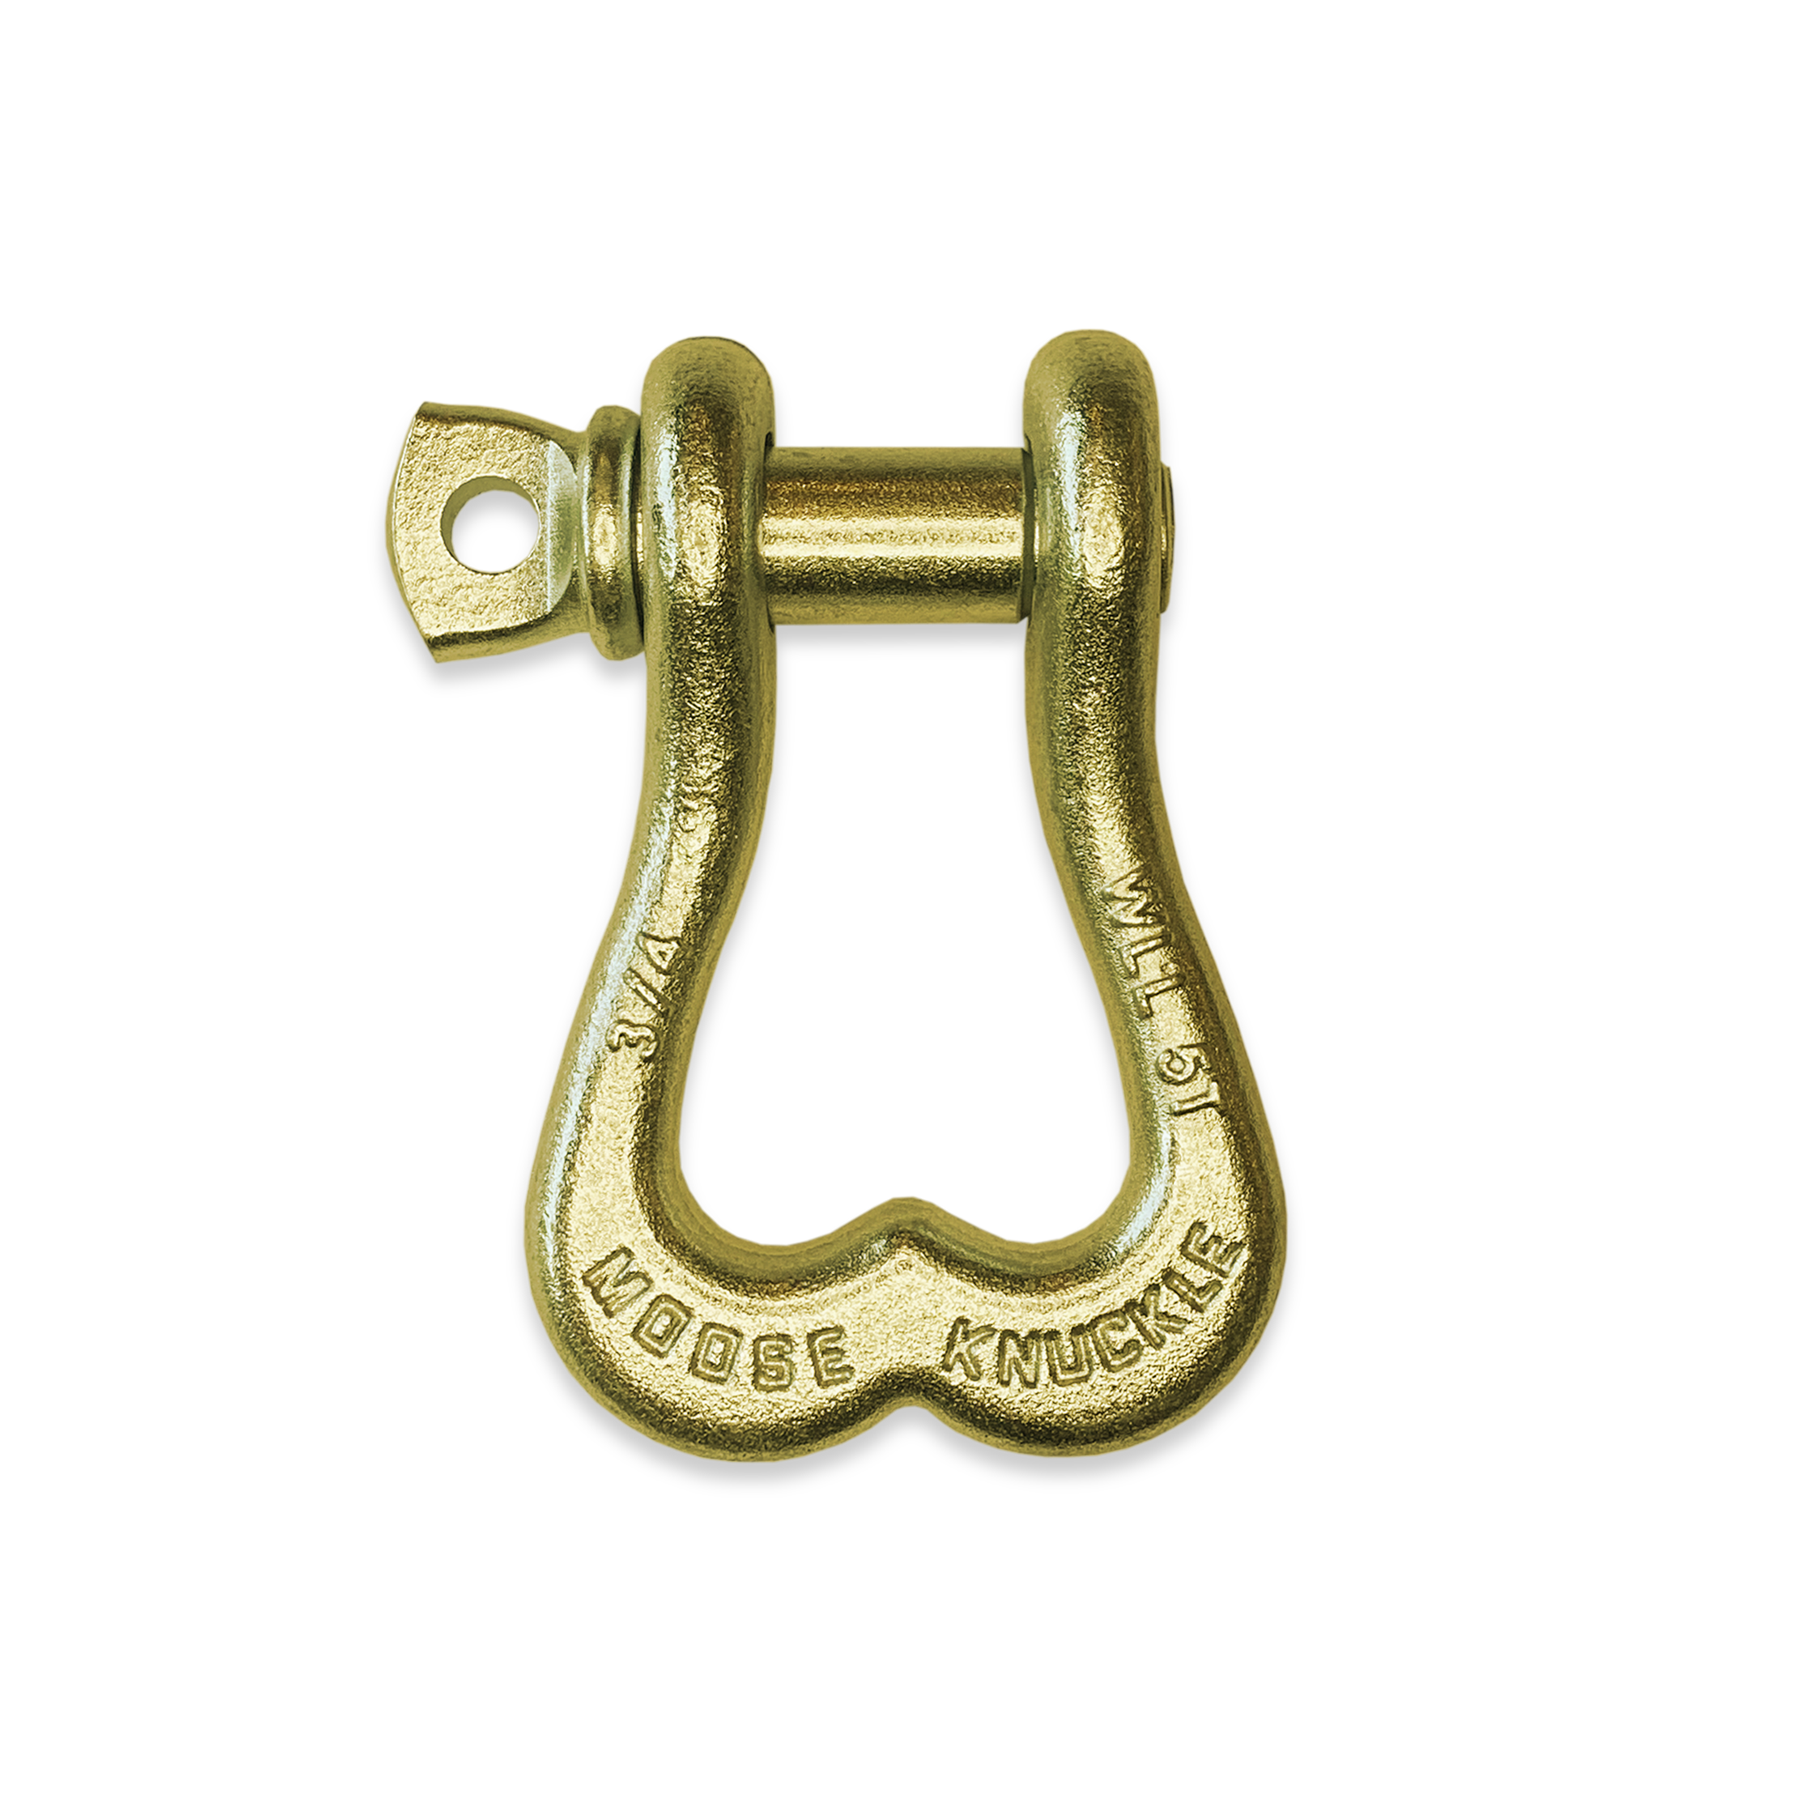 Moose Knuckle XL Brass Knuckle D-Ring 3/4" Shackle for Towing Off-Road Jeep, Tacoma, 4-Runner, 4x4 Truck and SxS Vehicle Recovery